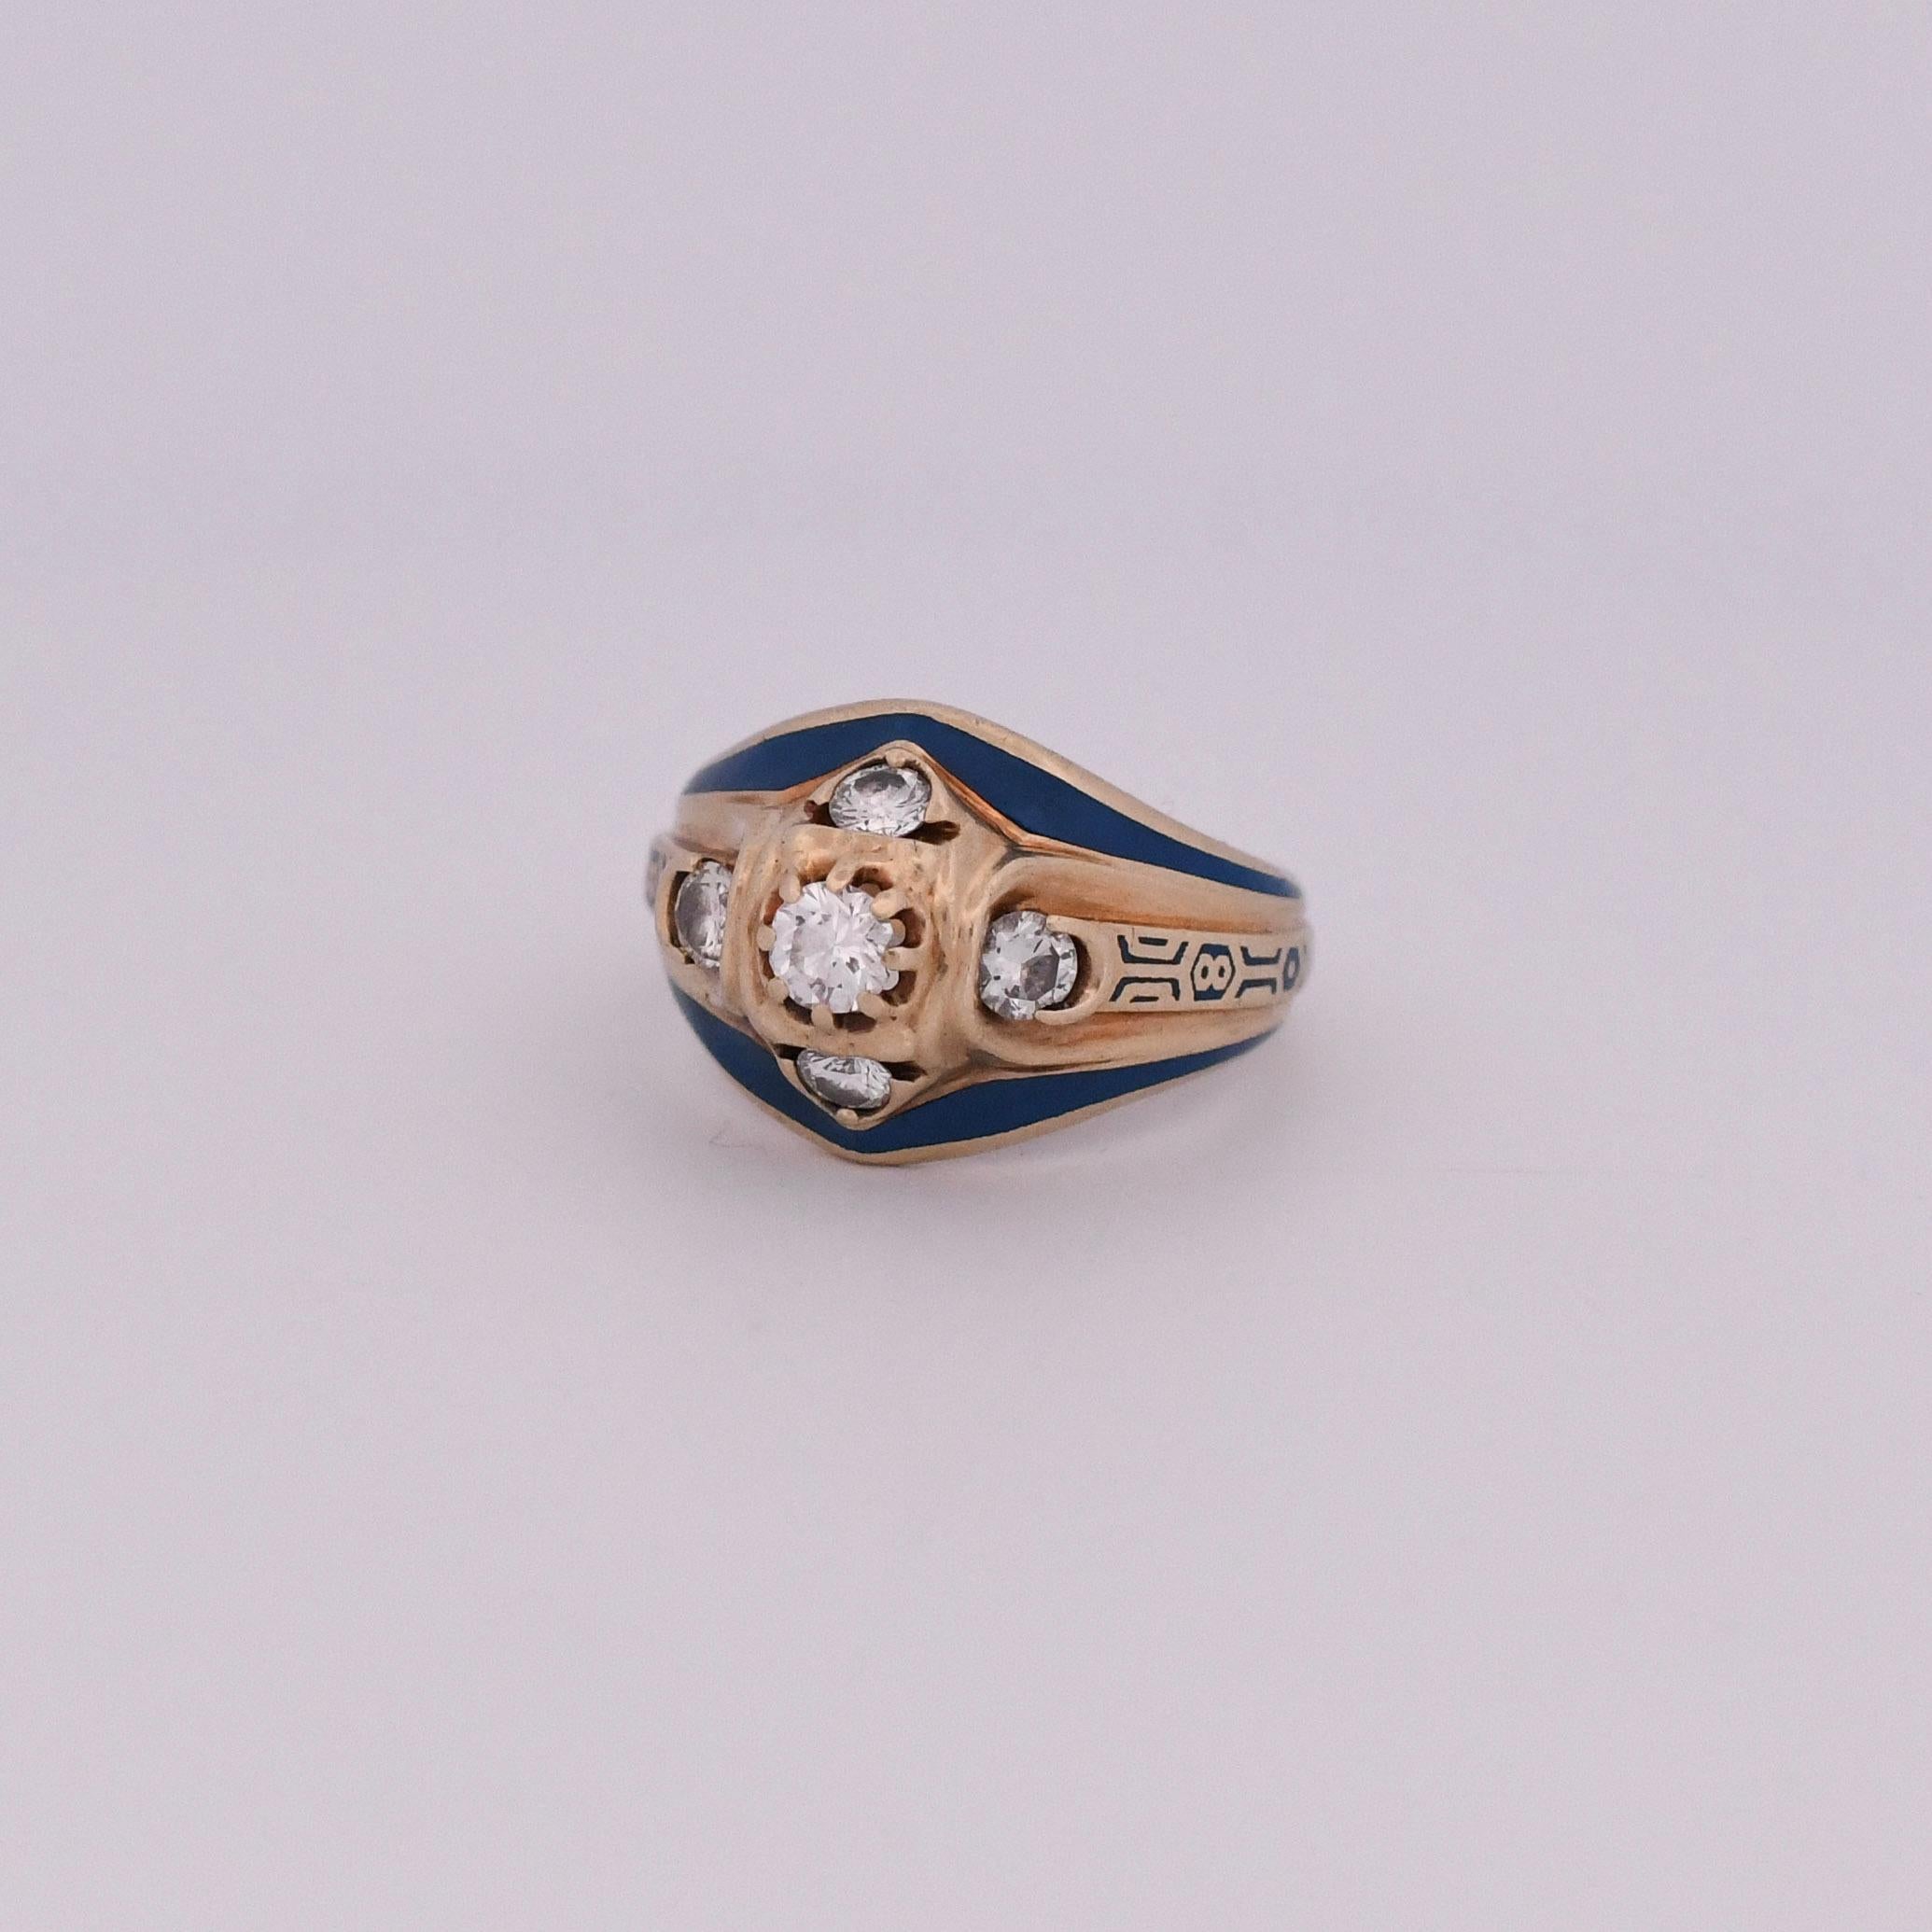 A remarkable and captivating treasure, this bold ring exudes a regal charm with its royal blue enamel details, carefully crafted in 10K yellow gold. The five-diamond design adds a touch of vintage elegance, creating a truly majestic and distinctive